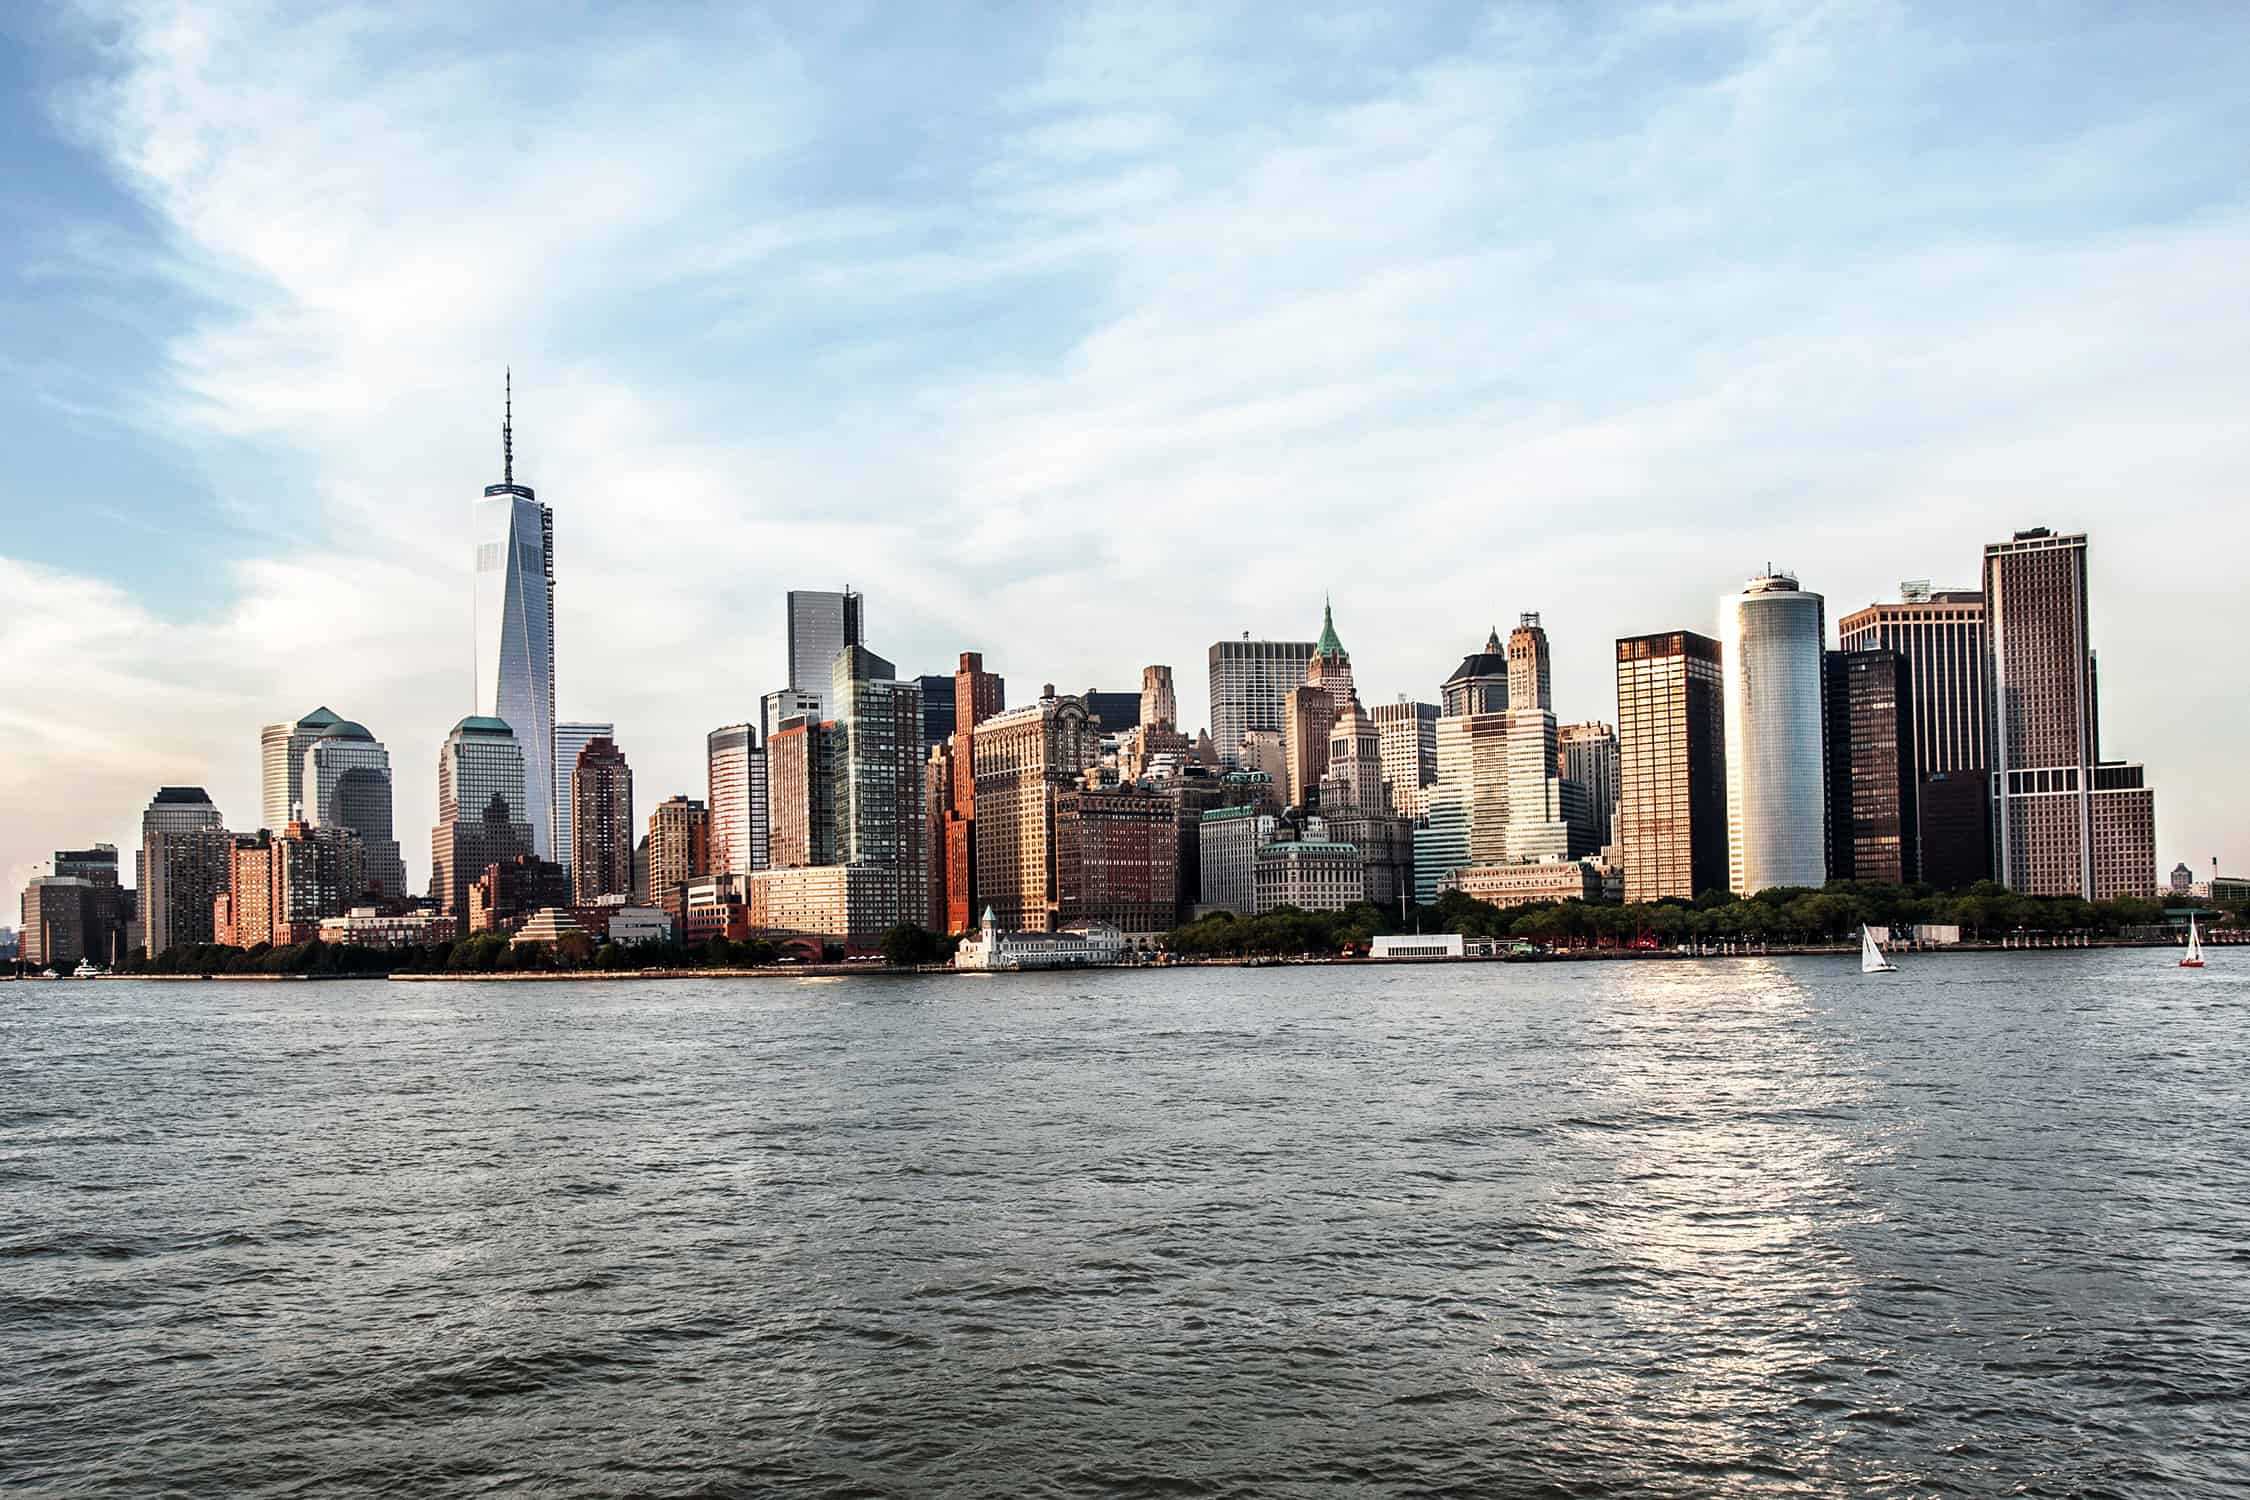 Is new york one of the largest cities in the world was фото 111